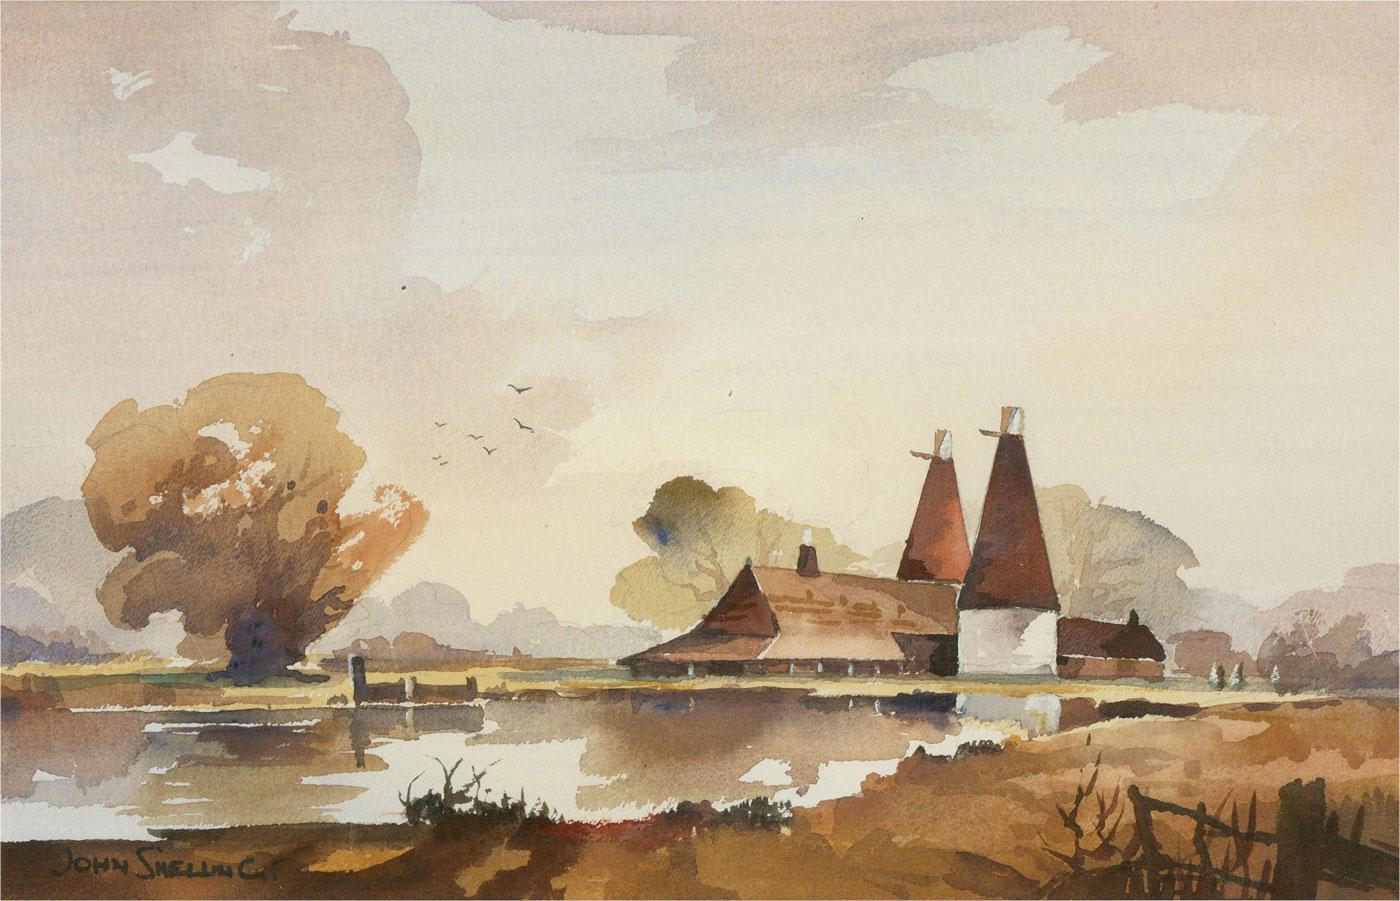 A charming watercolour painting by the artist John Snelling, depicting an oast house. Signed to the lower left-hand corner. There is a label on the reverse inscribed with the artist's name and title. Well-presented in a washline card mount and in